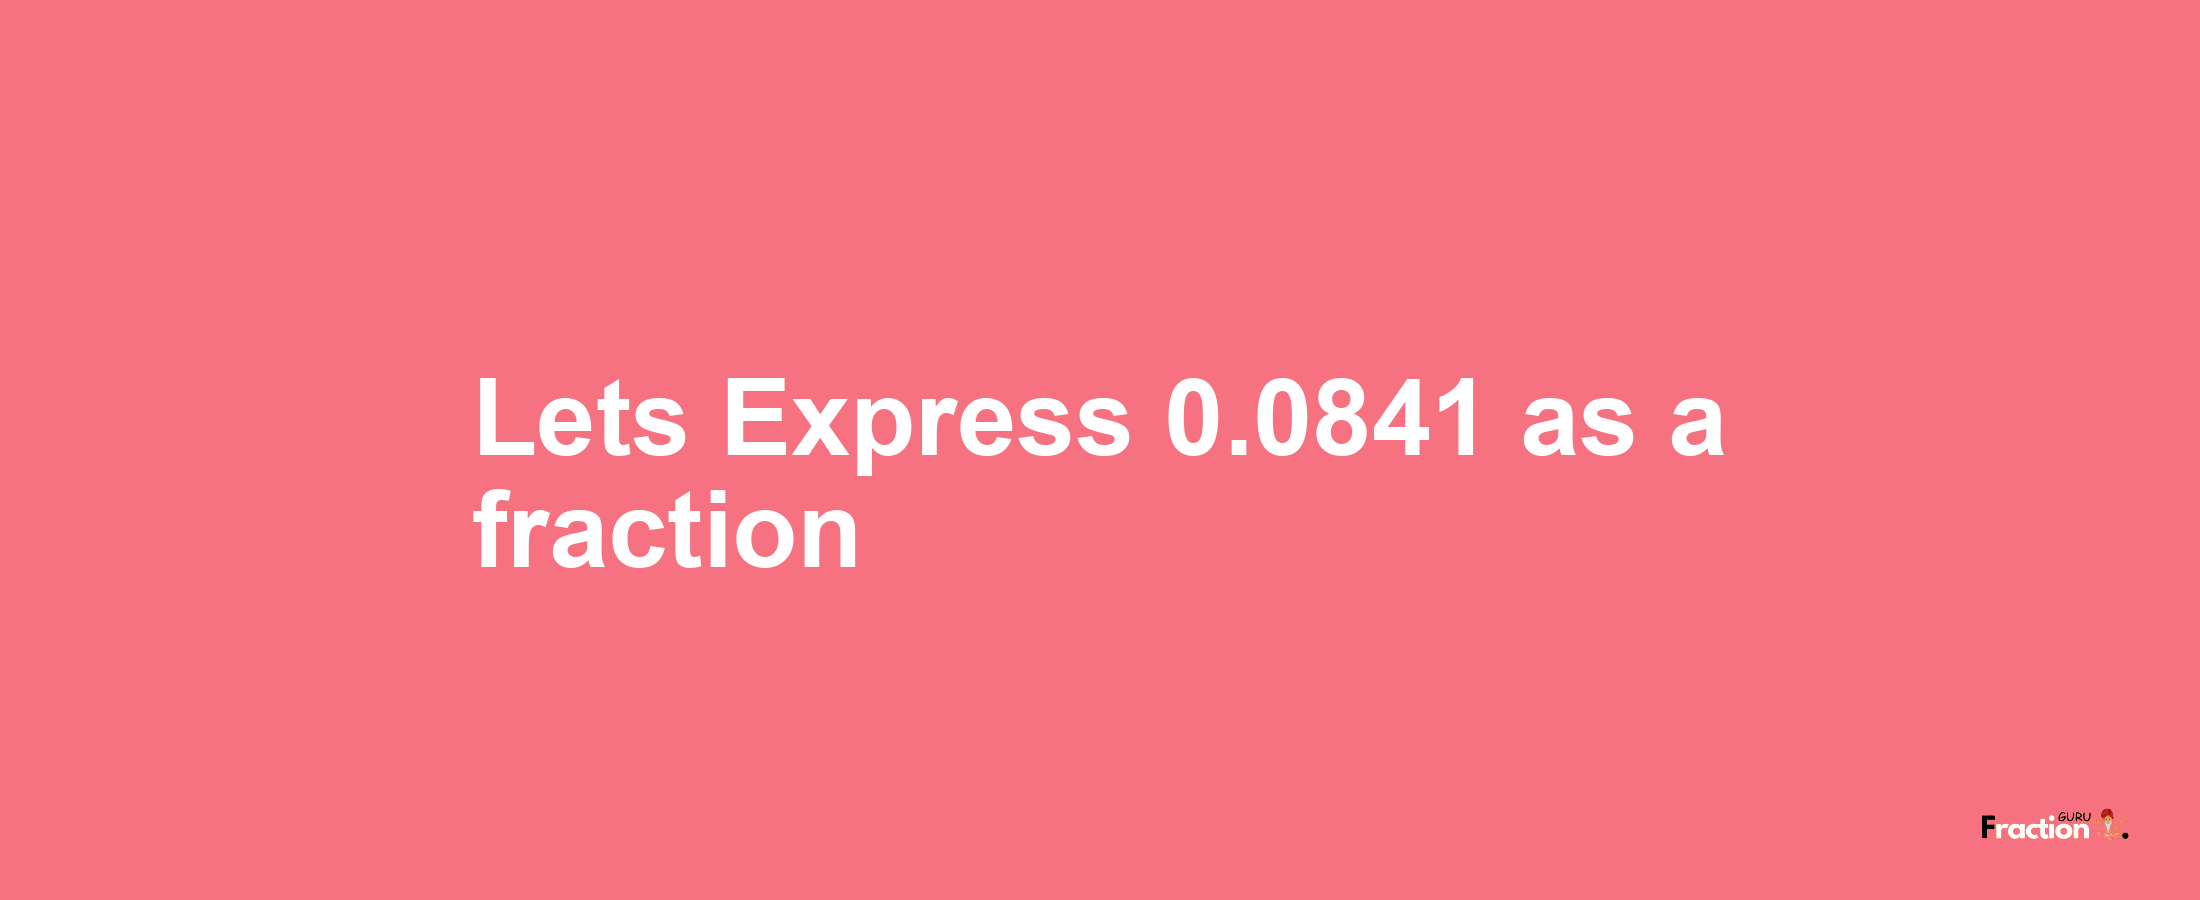 Lets Express 0.0841 as afraction